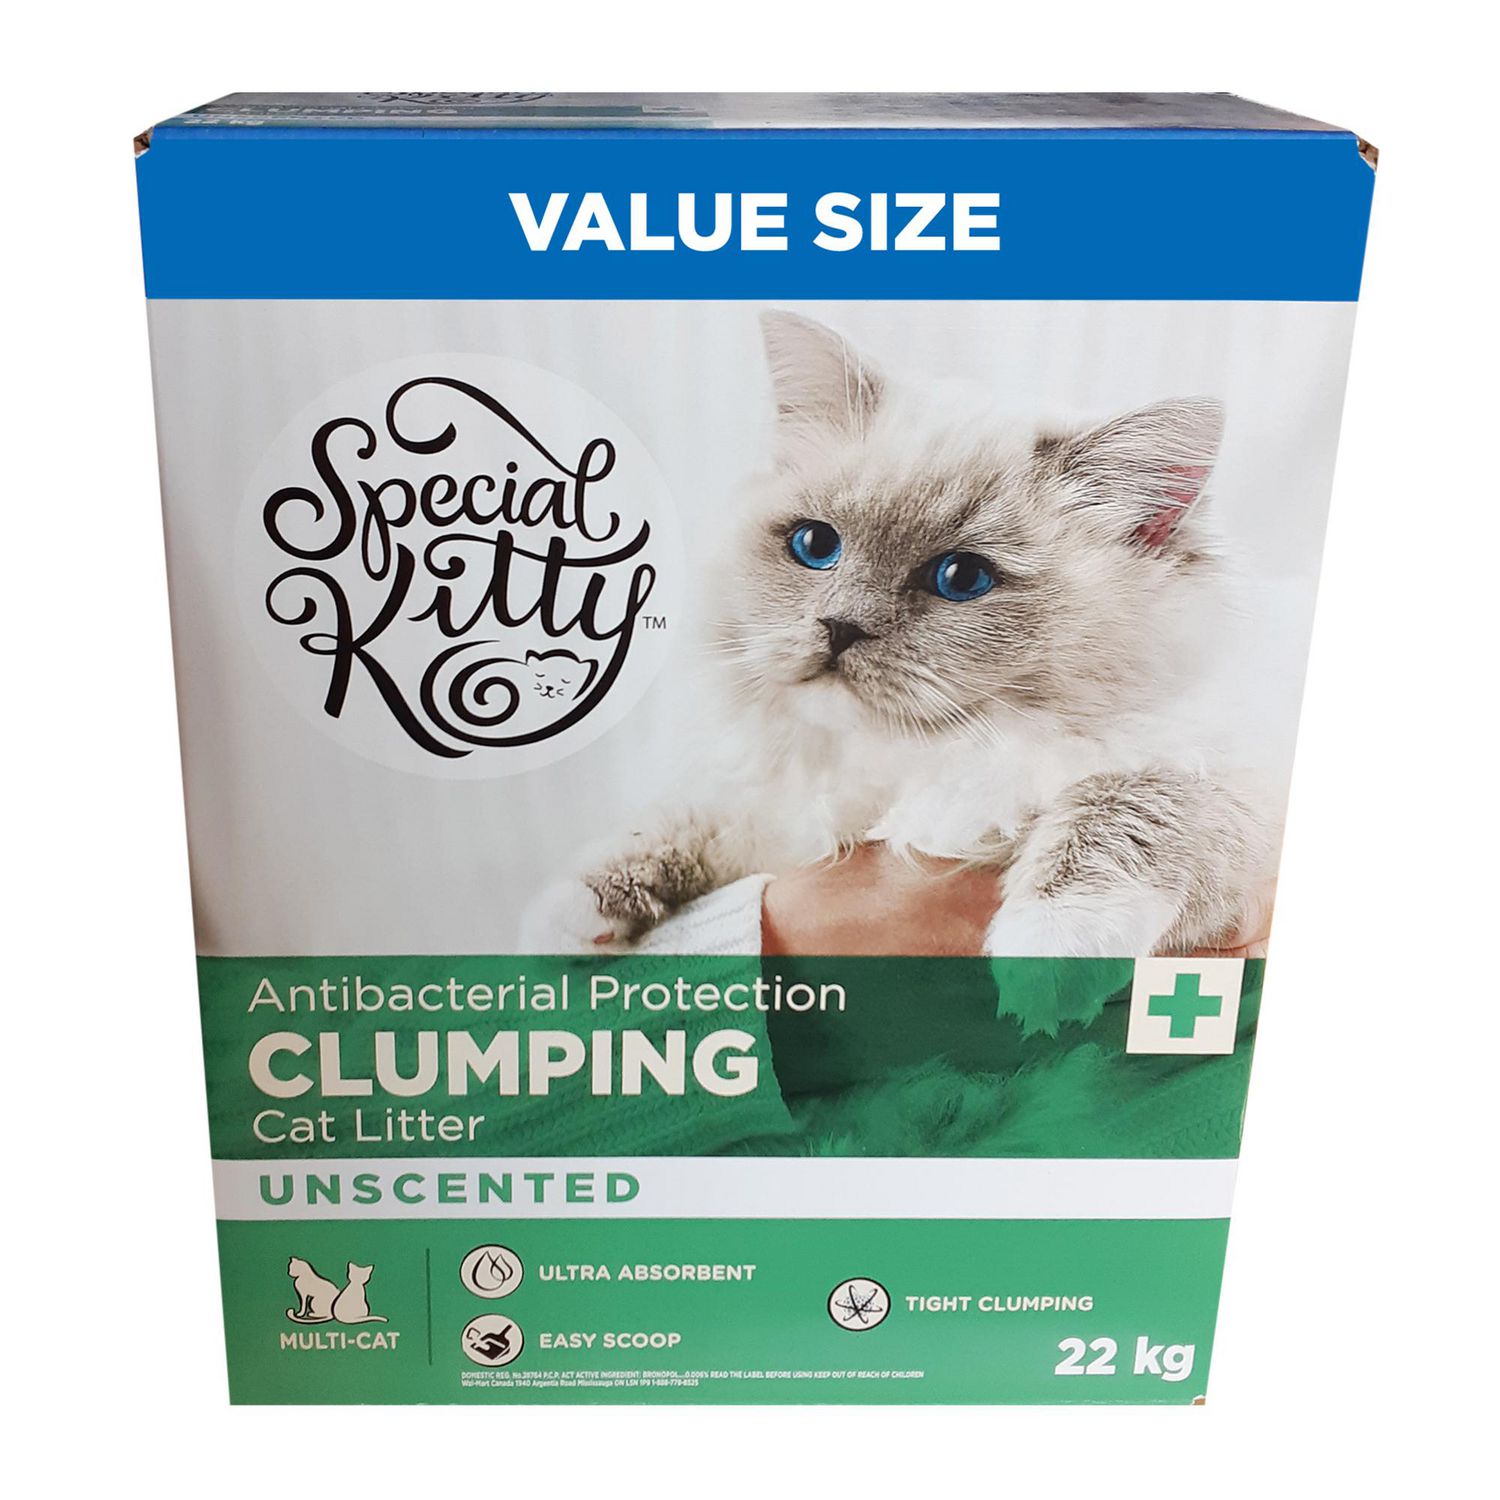 Special Kitty Antibacterial Protection Clumping Cat Litter Unscented